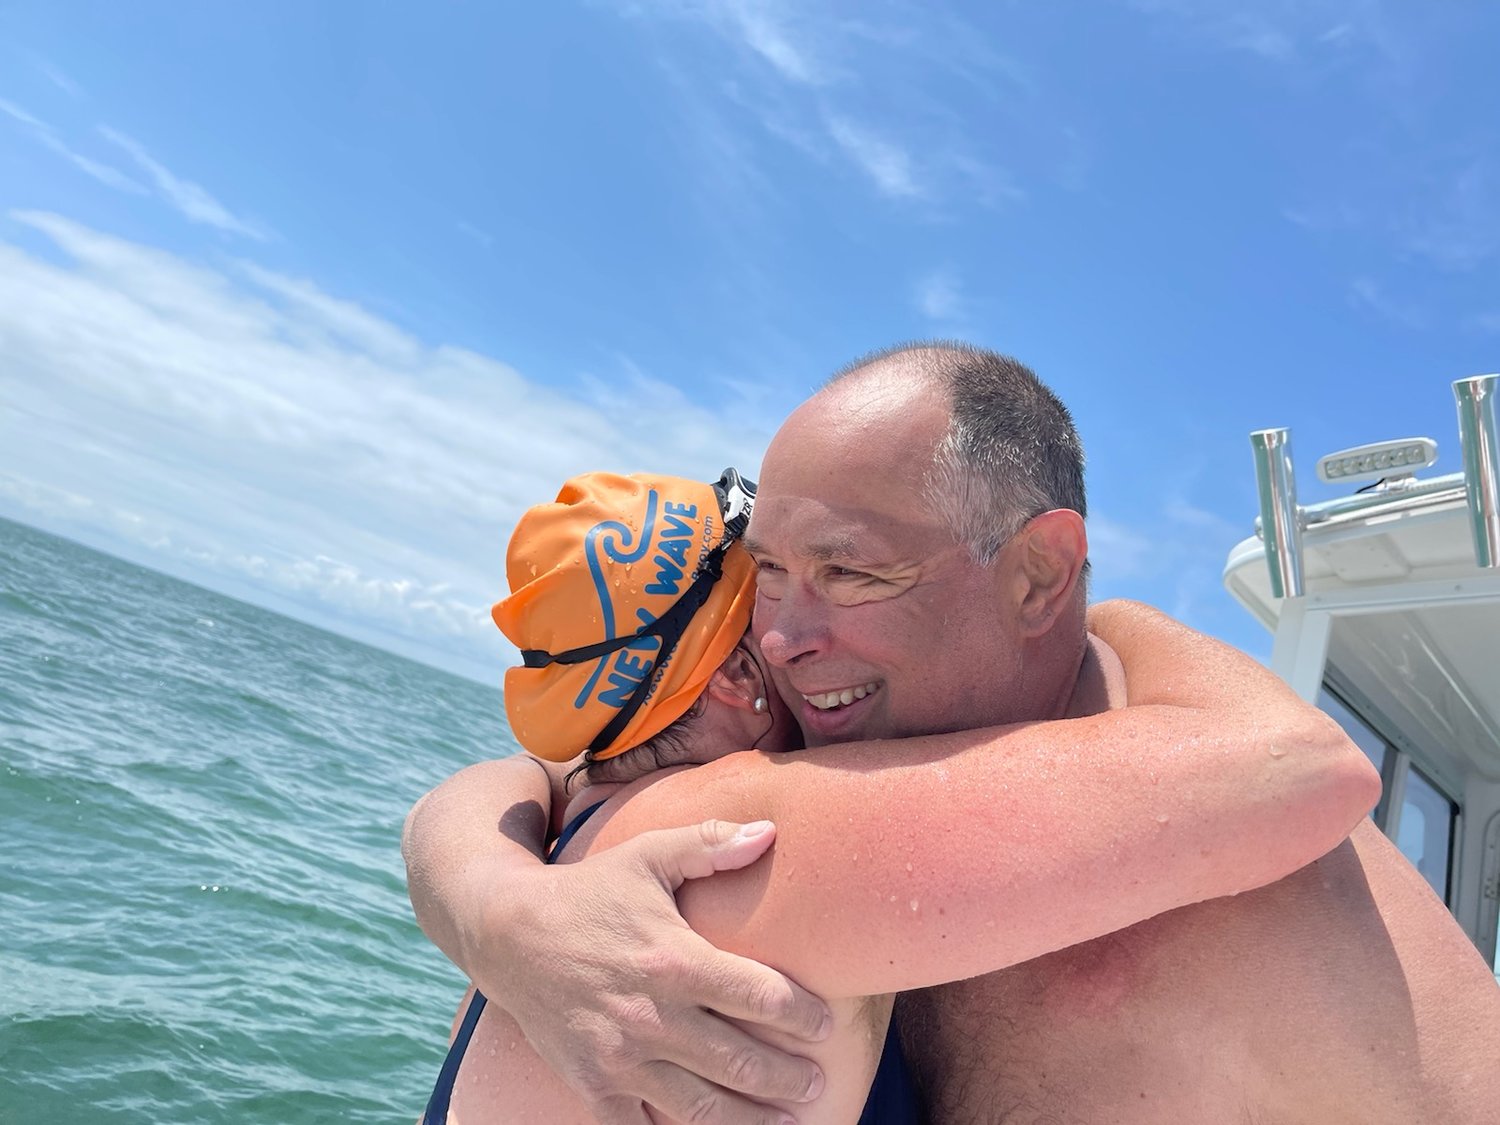 Deb Blair, the last person to complete a swim from island to island, in 2000, gives Doug McConnell a hug after he ended his swim.